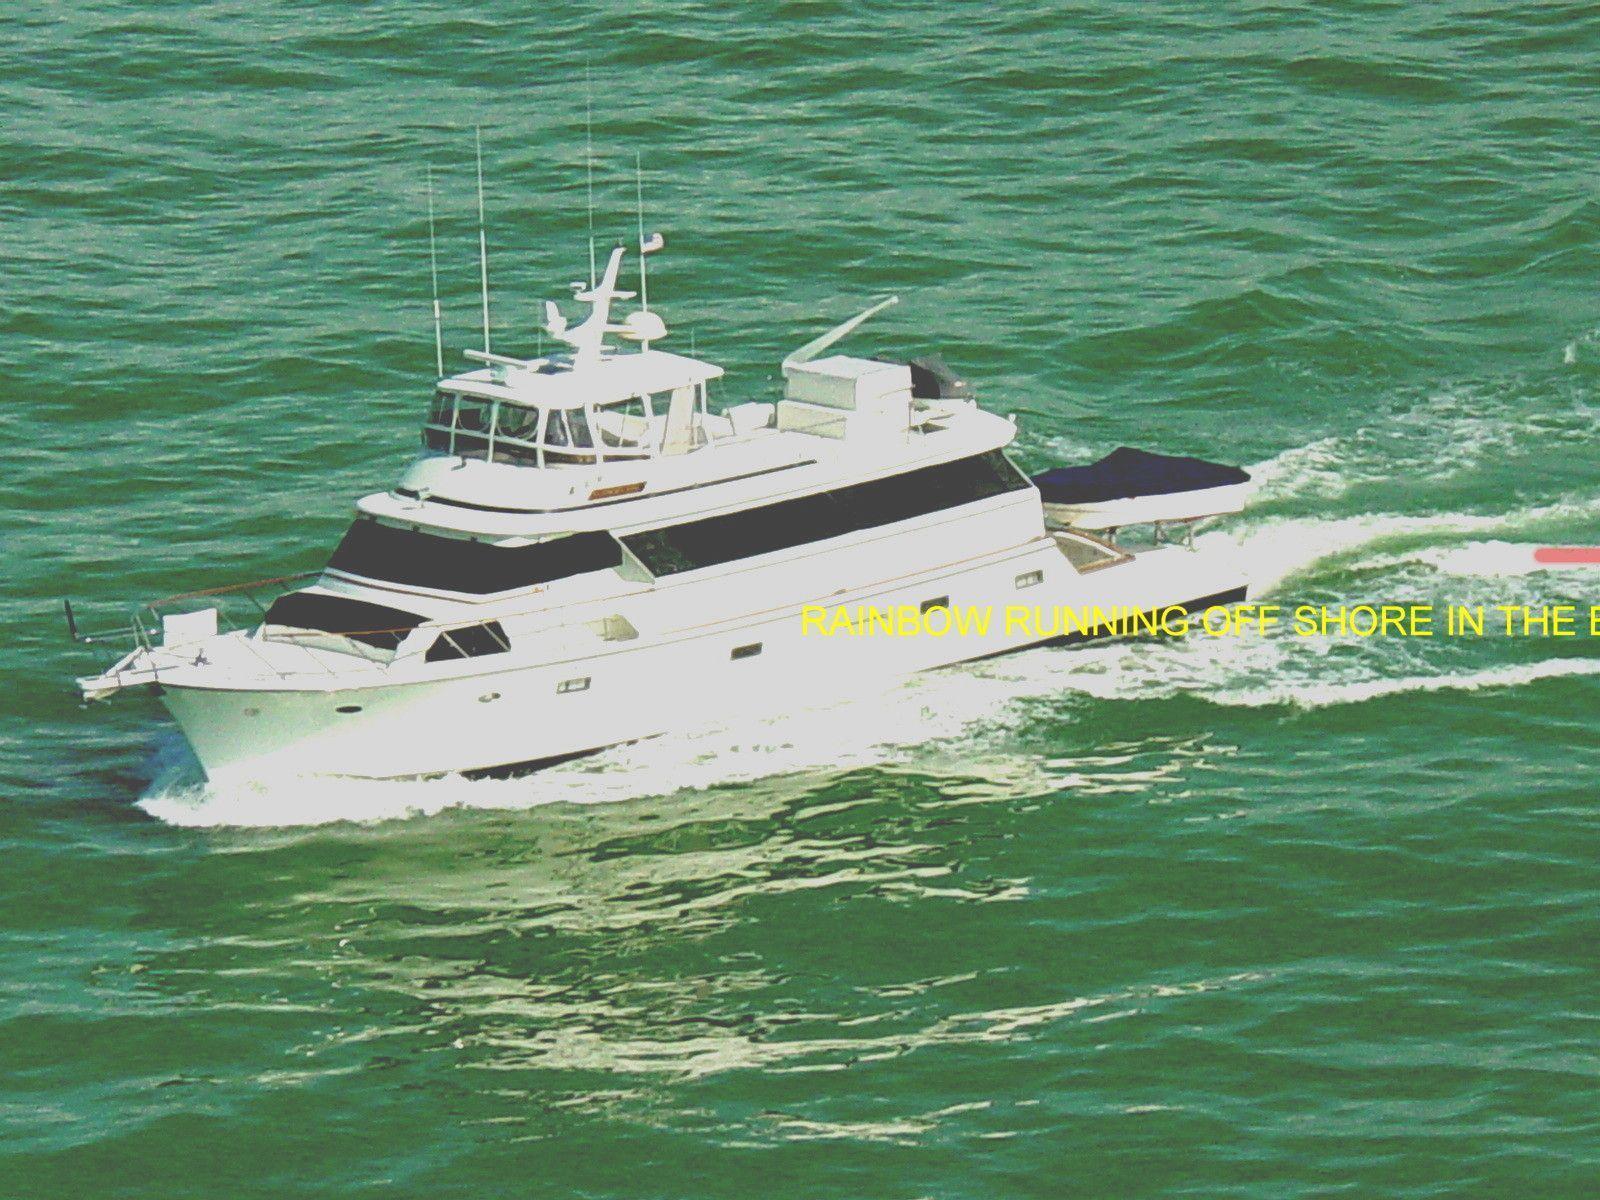 Pacifica Motor Yacht, St.Pete